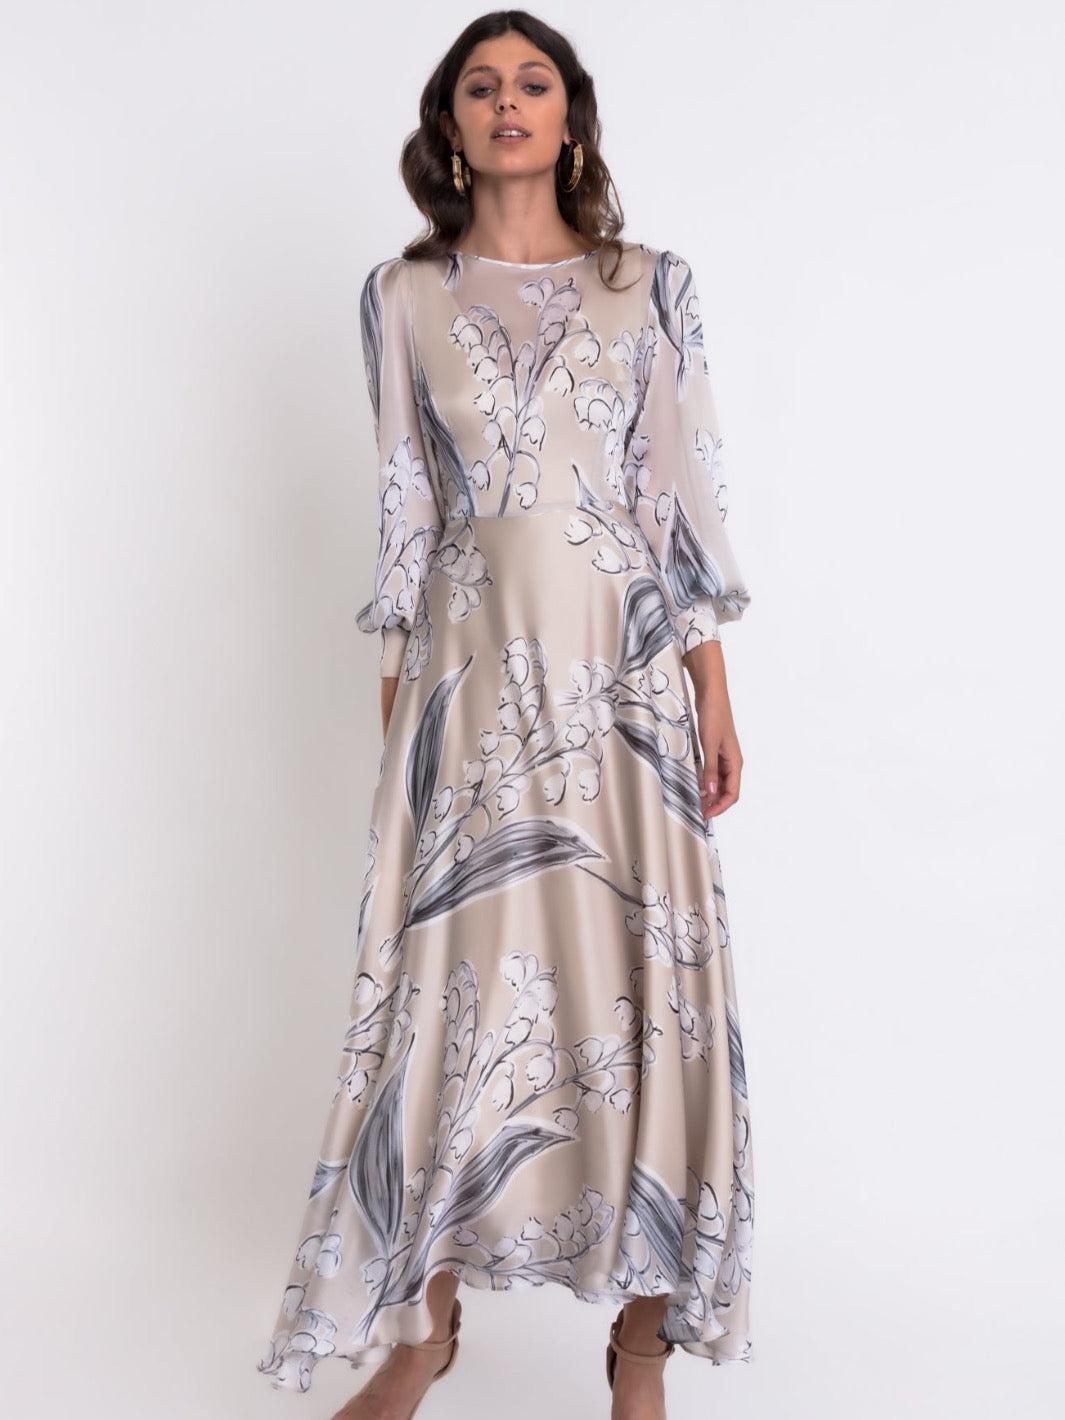 Matilde Cano Dress 2236-Occasion Wear-Guest of the wedding-Nicola Ross